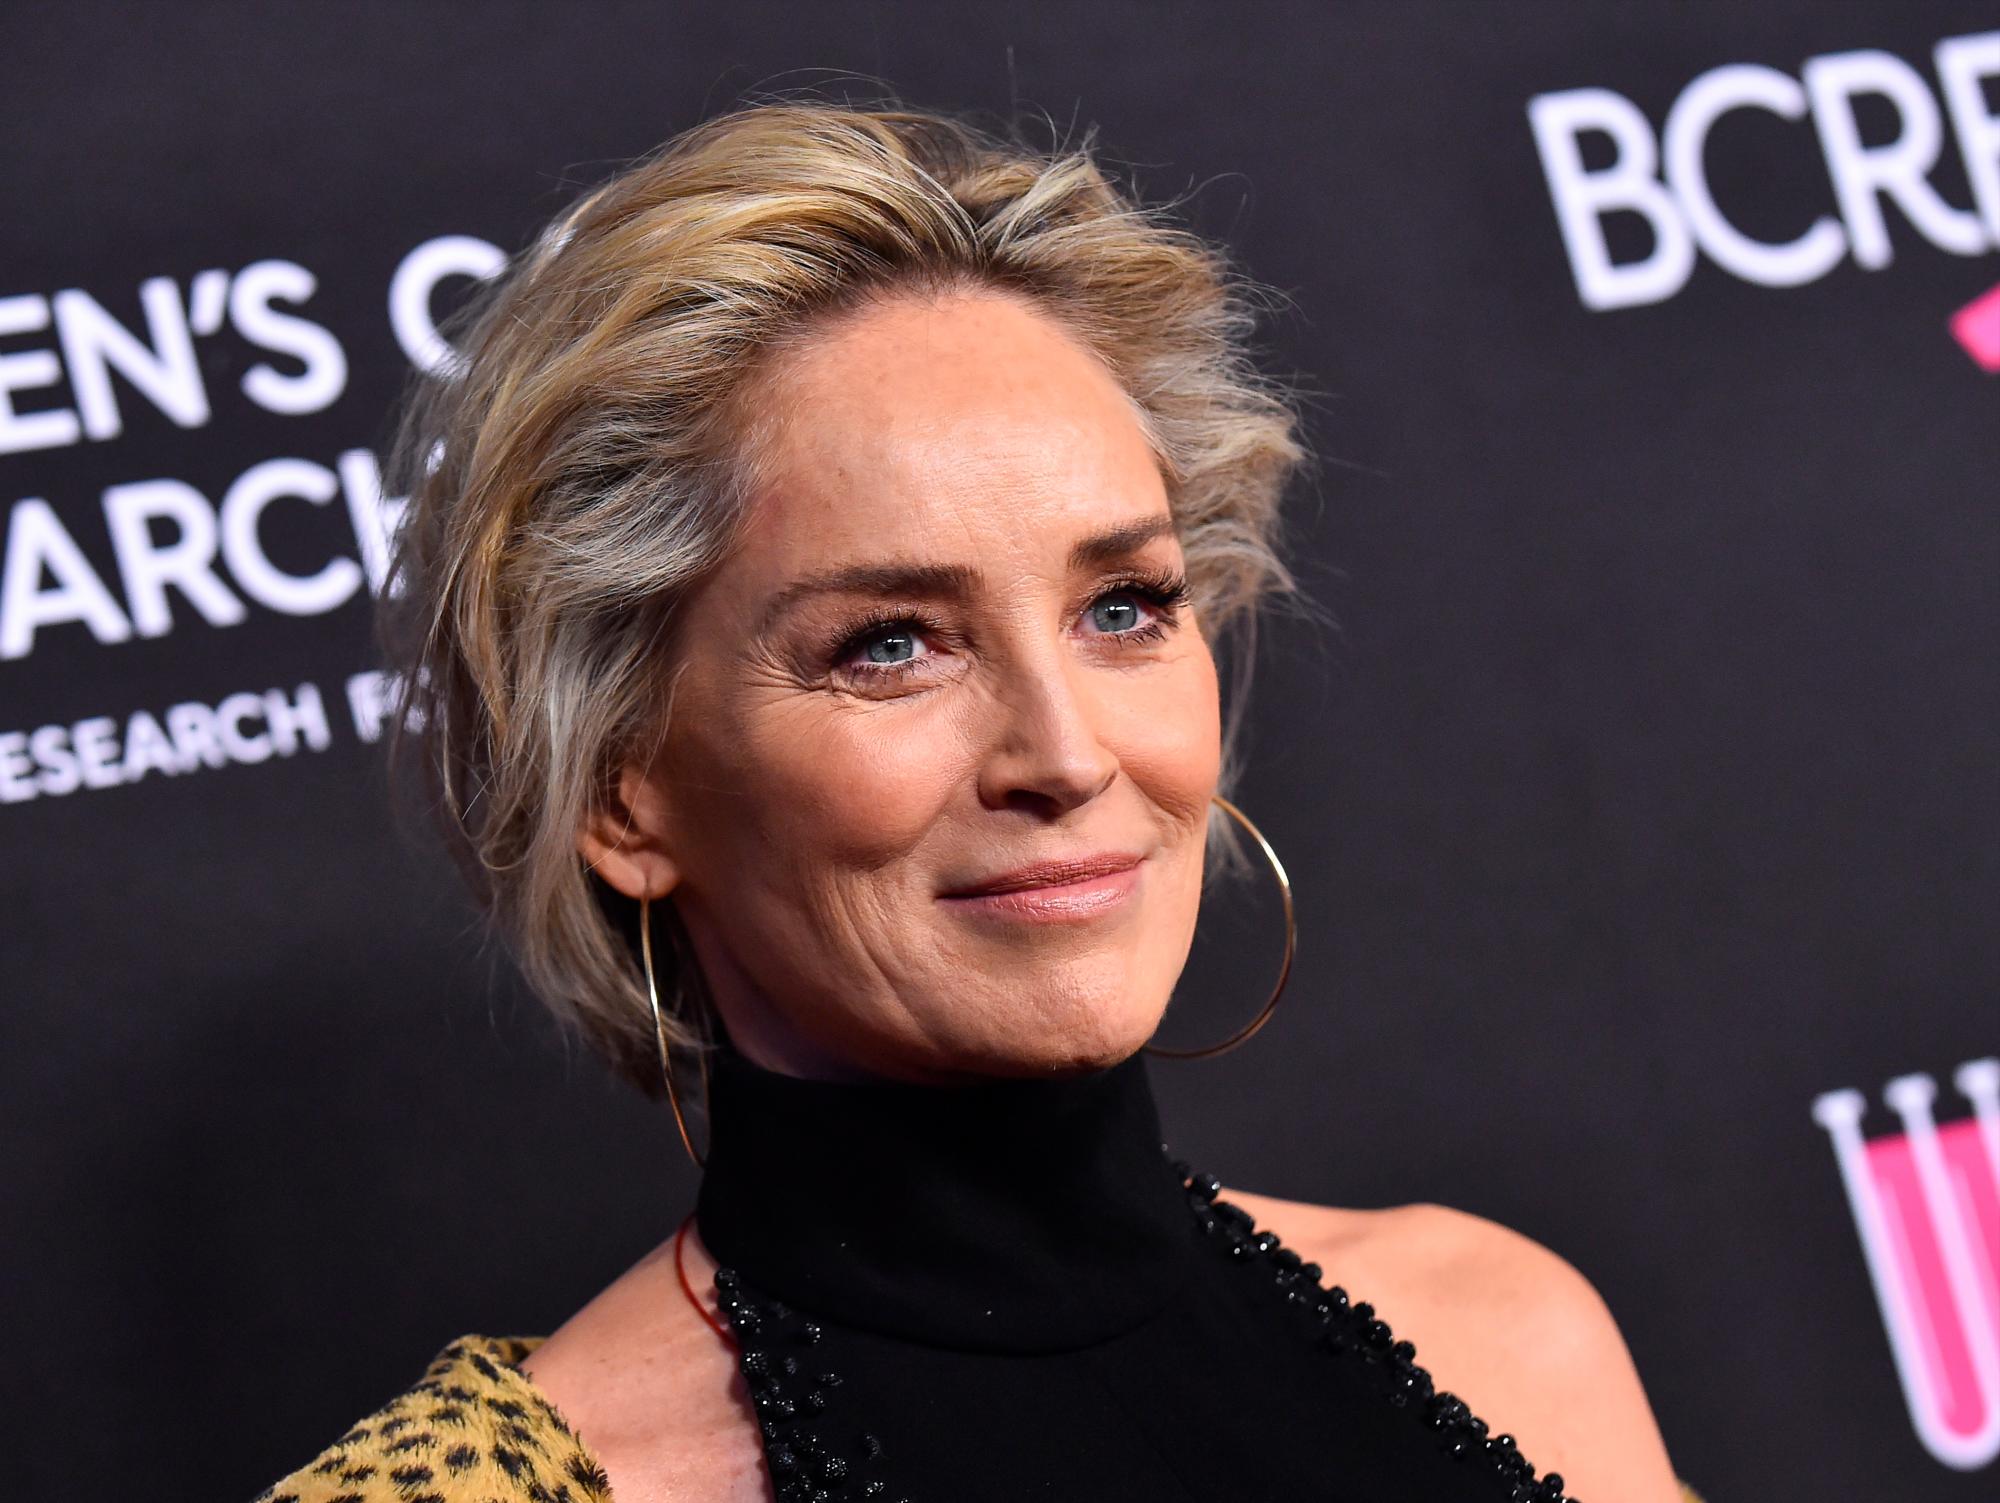 Sharon Stone reveals episodes of sexual abuse in Hollywood